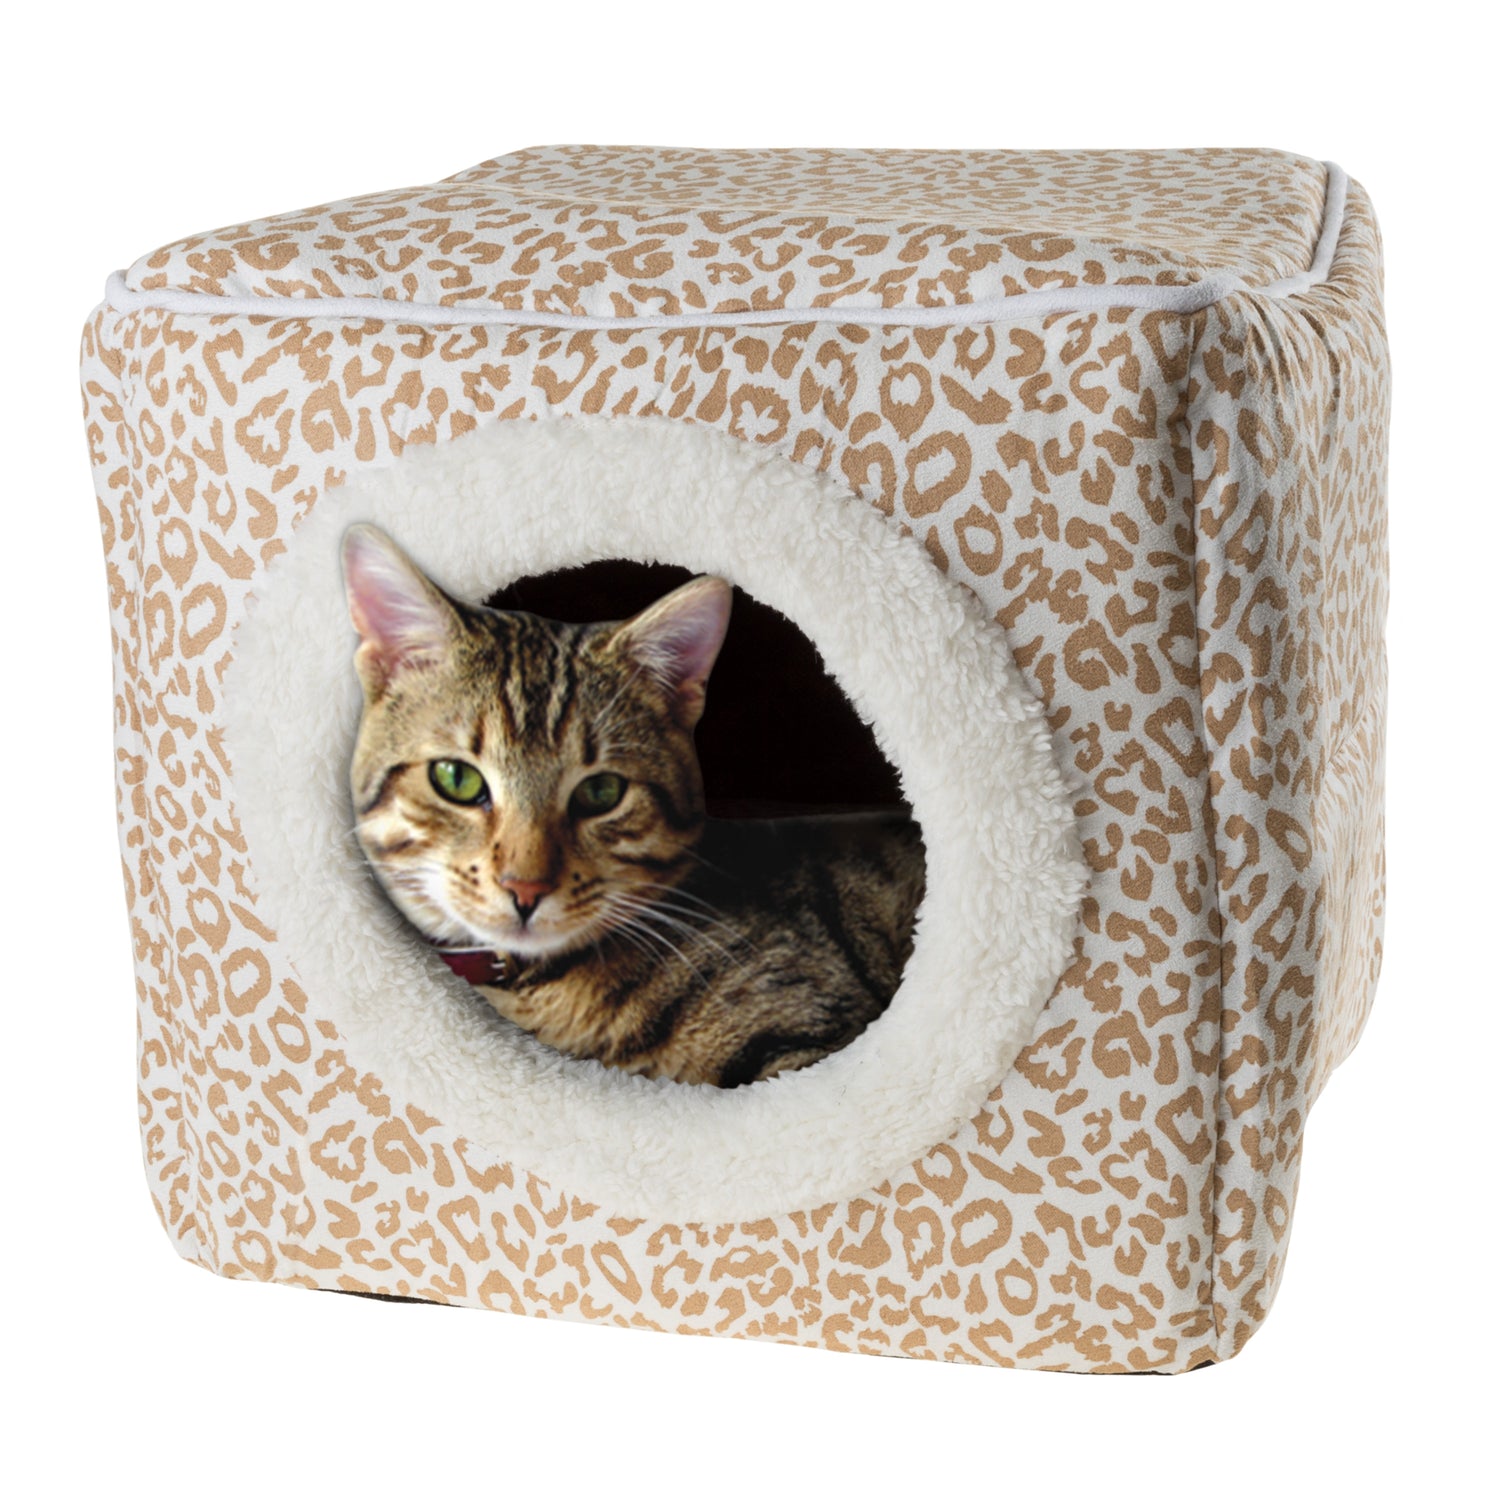 PETMAKER Cat Pet Bed Cave Indoor Enclosed Covered Cavern House for Cats Kittens and Small Pets with Removable Cushion, Tan White Animal Print